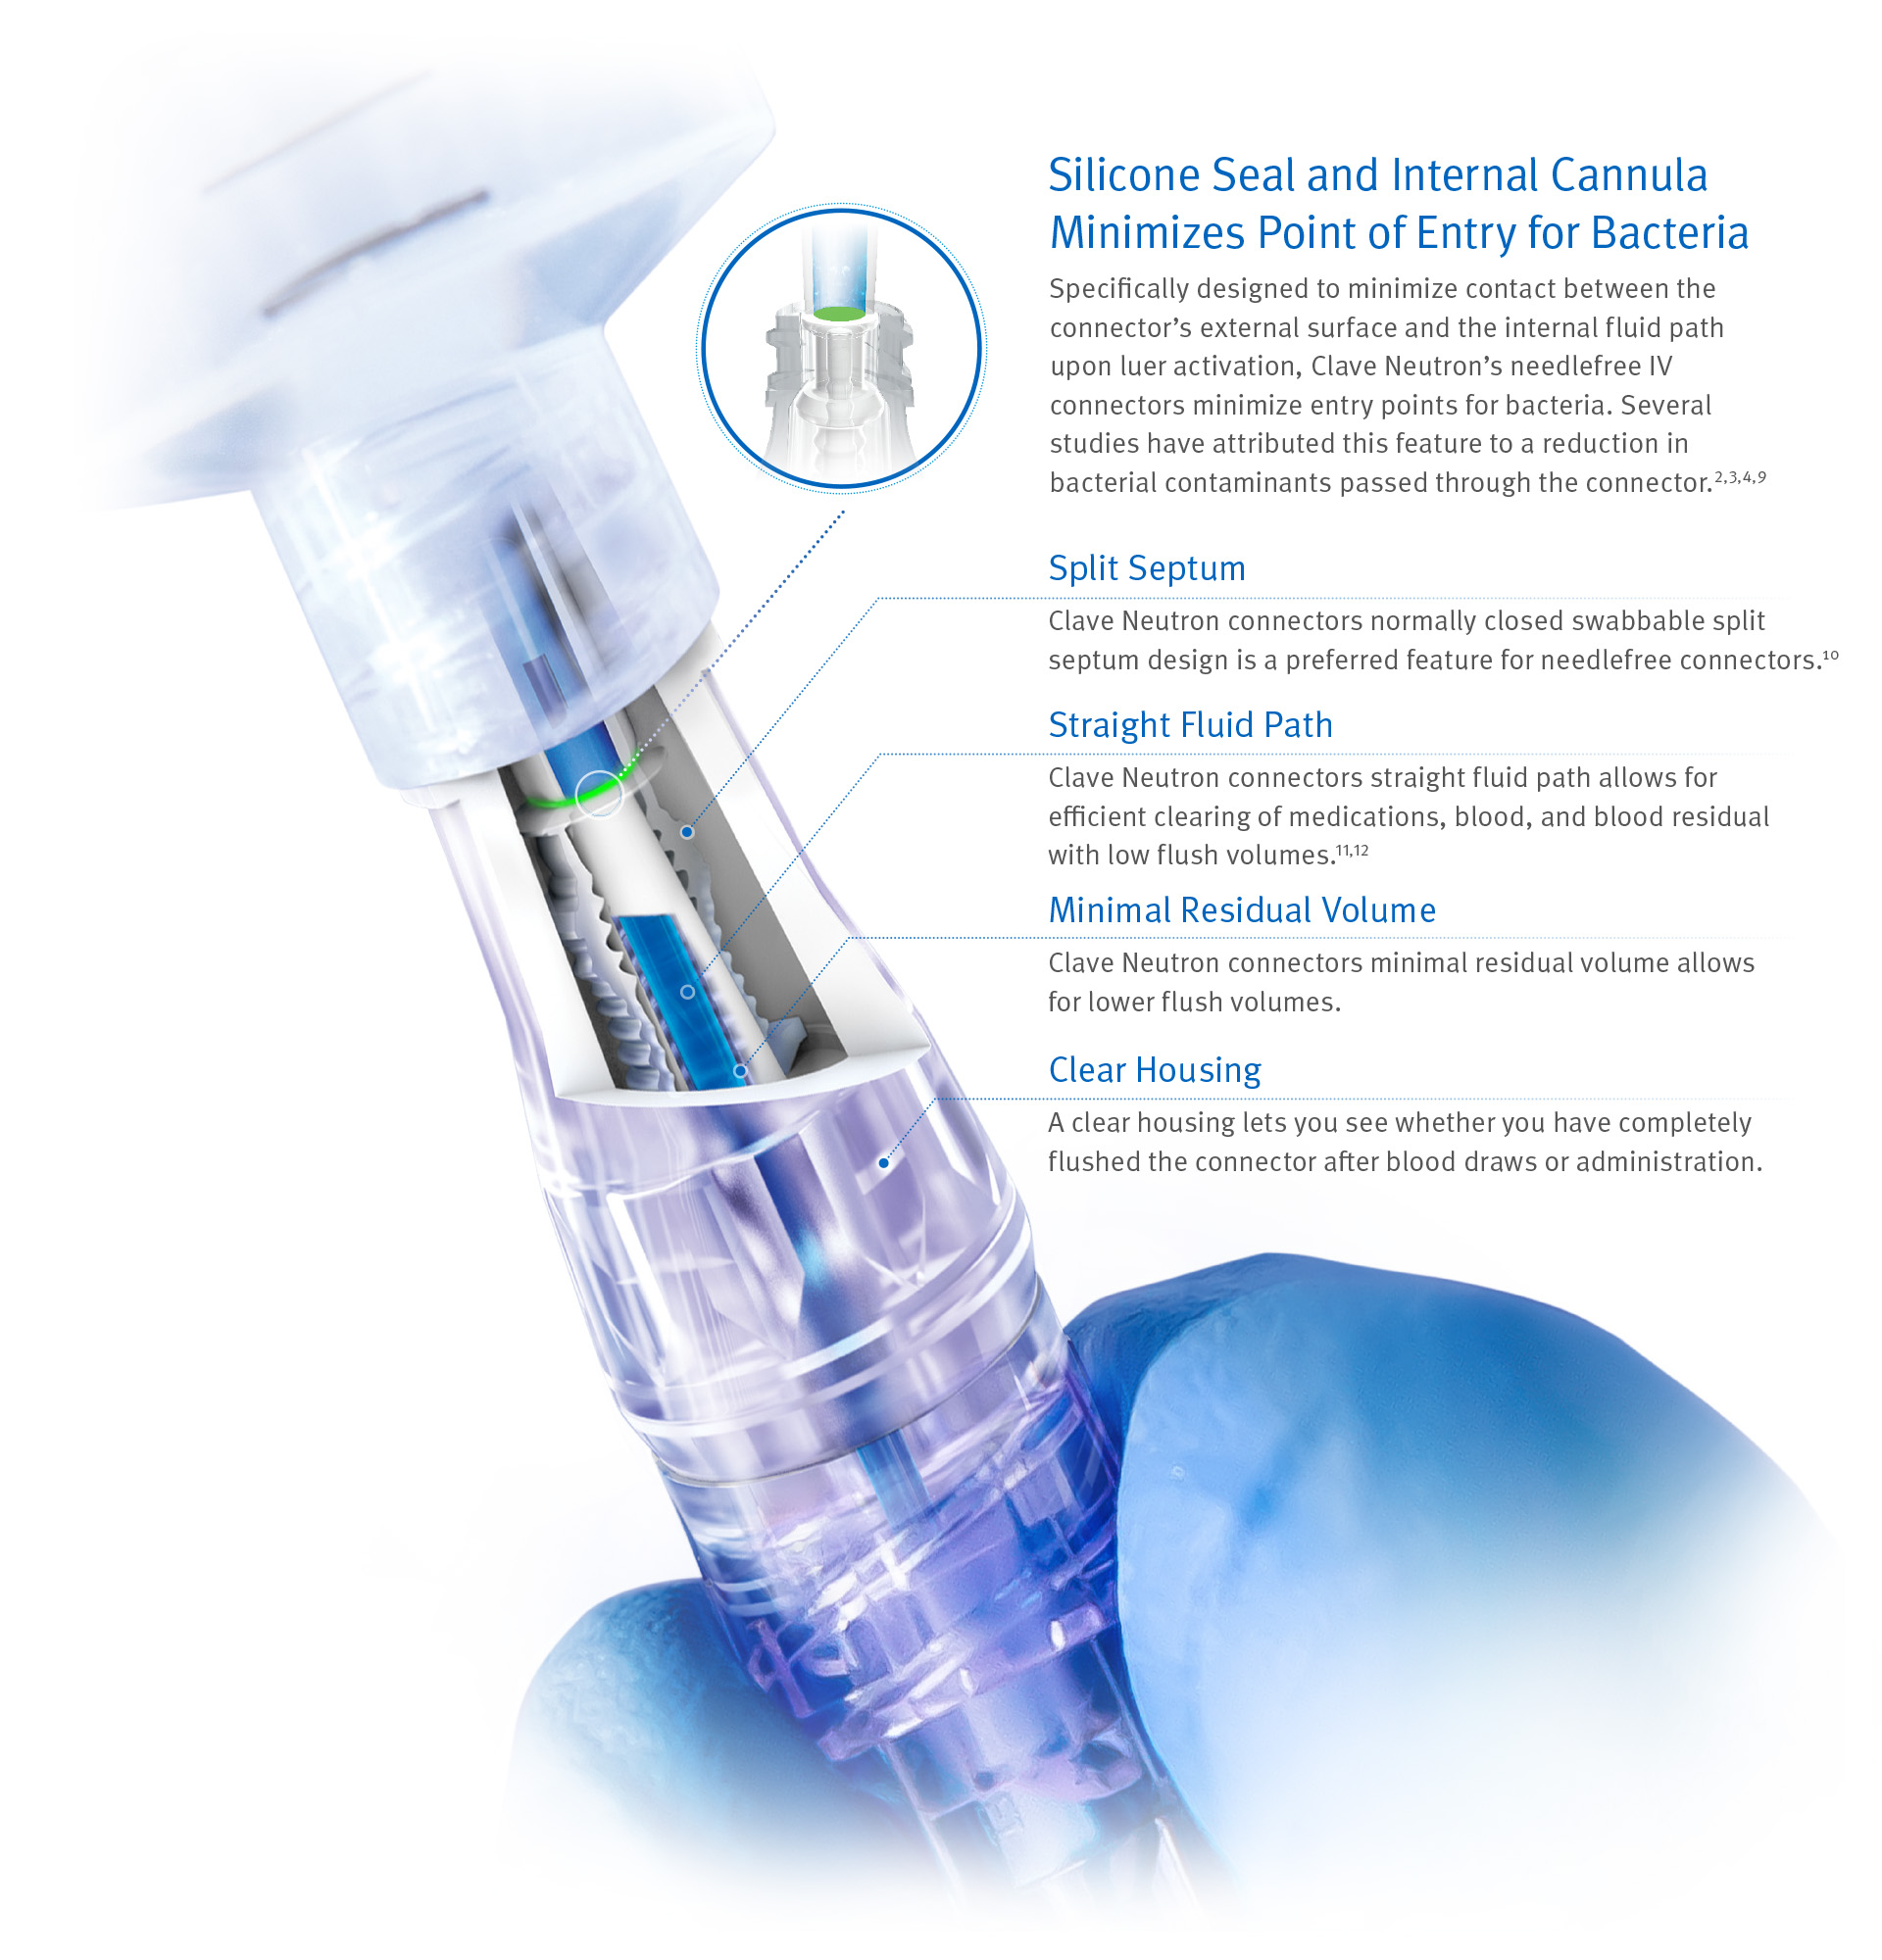 New IV connector products announced - Hospital Pharmacy